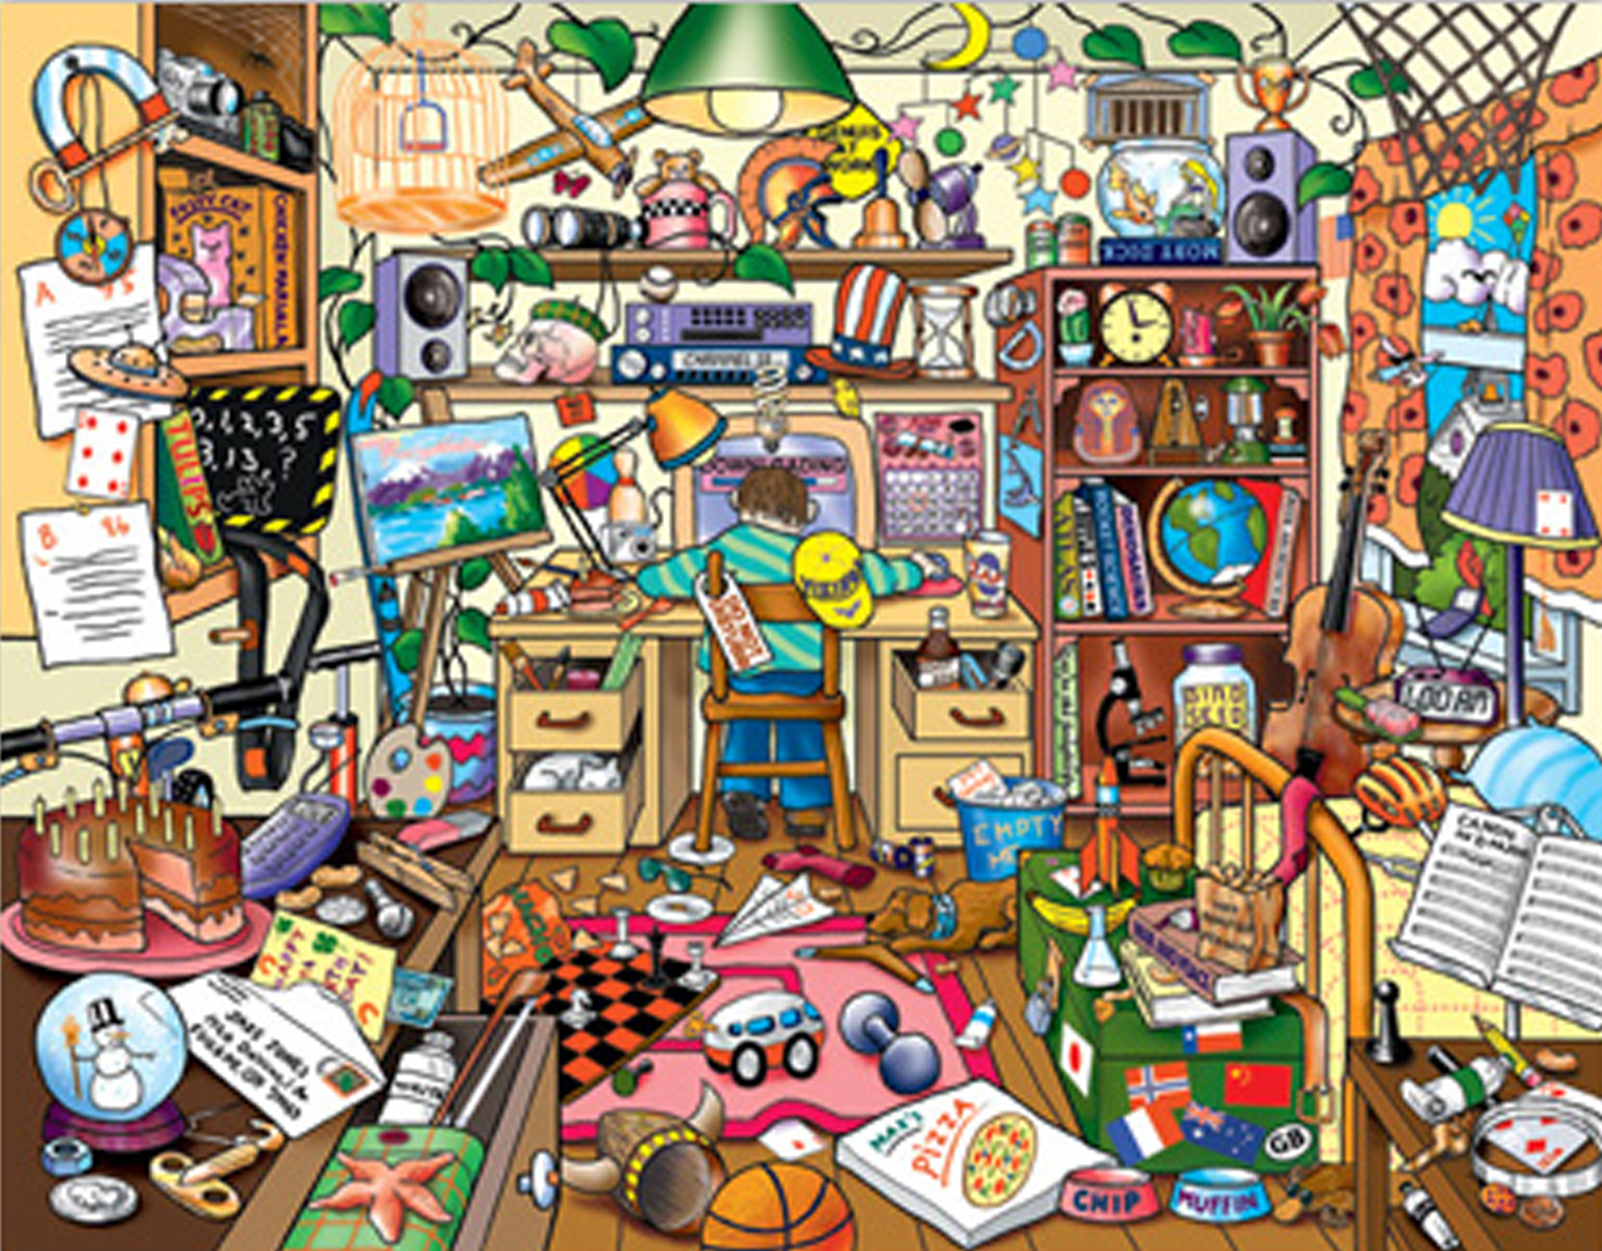 A jumble of objects in a very messy room